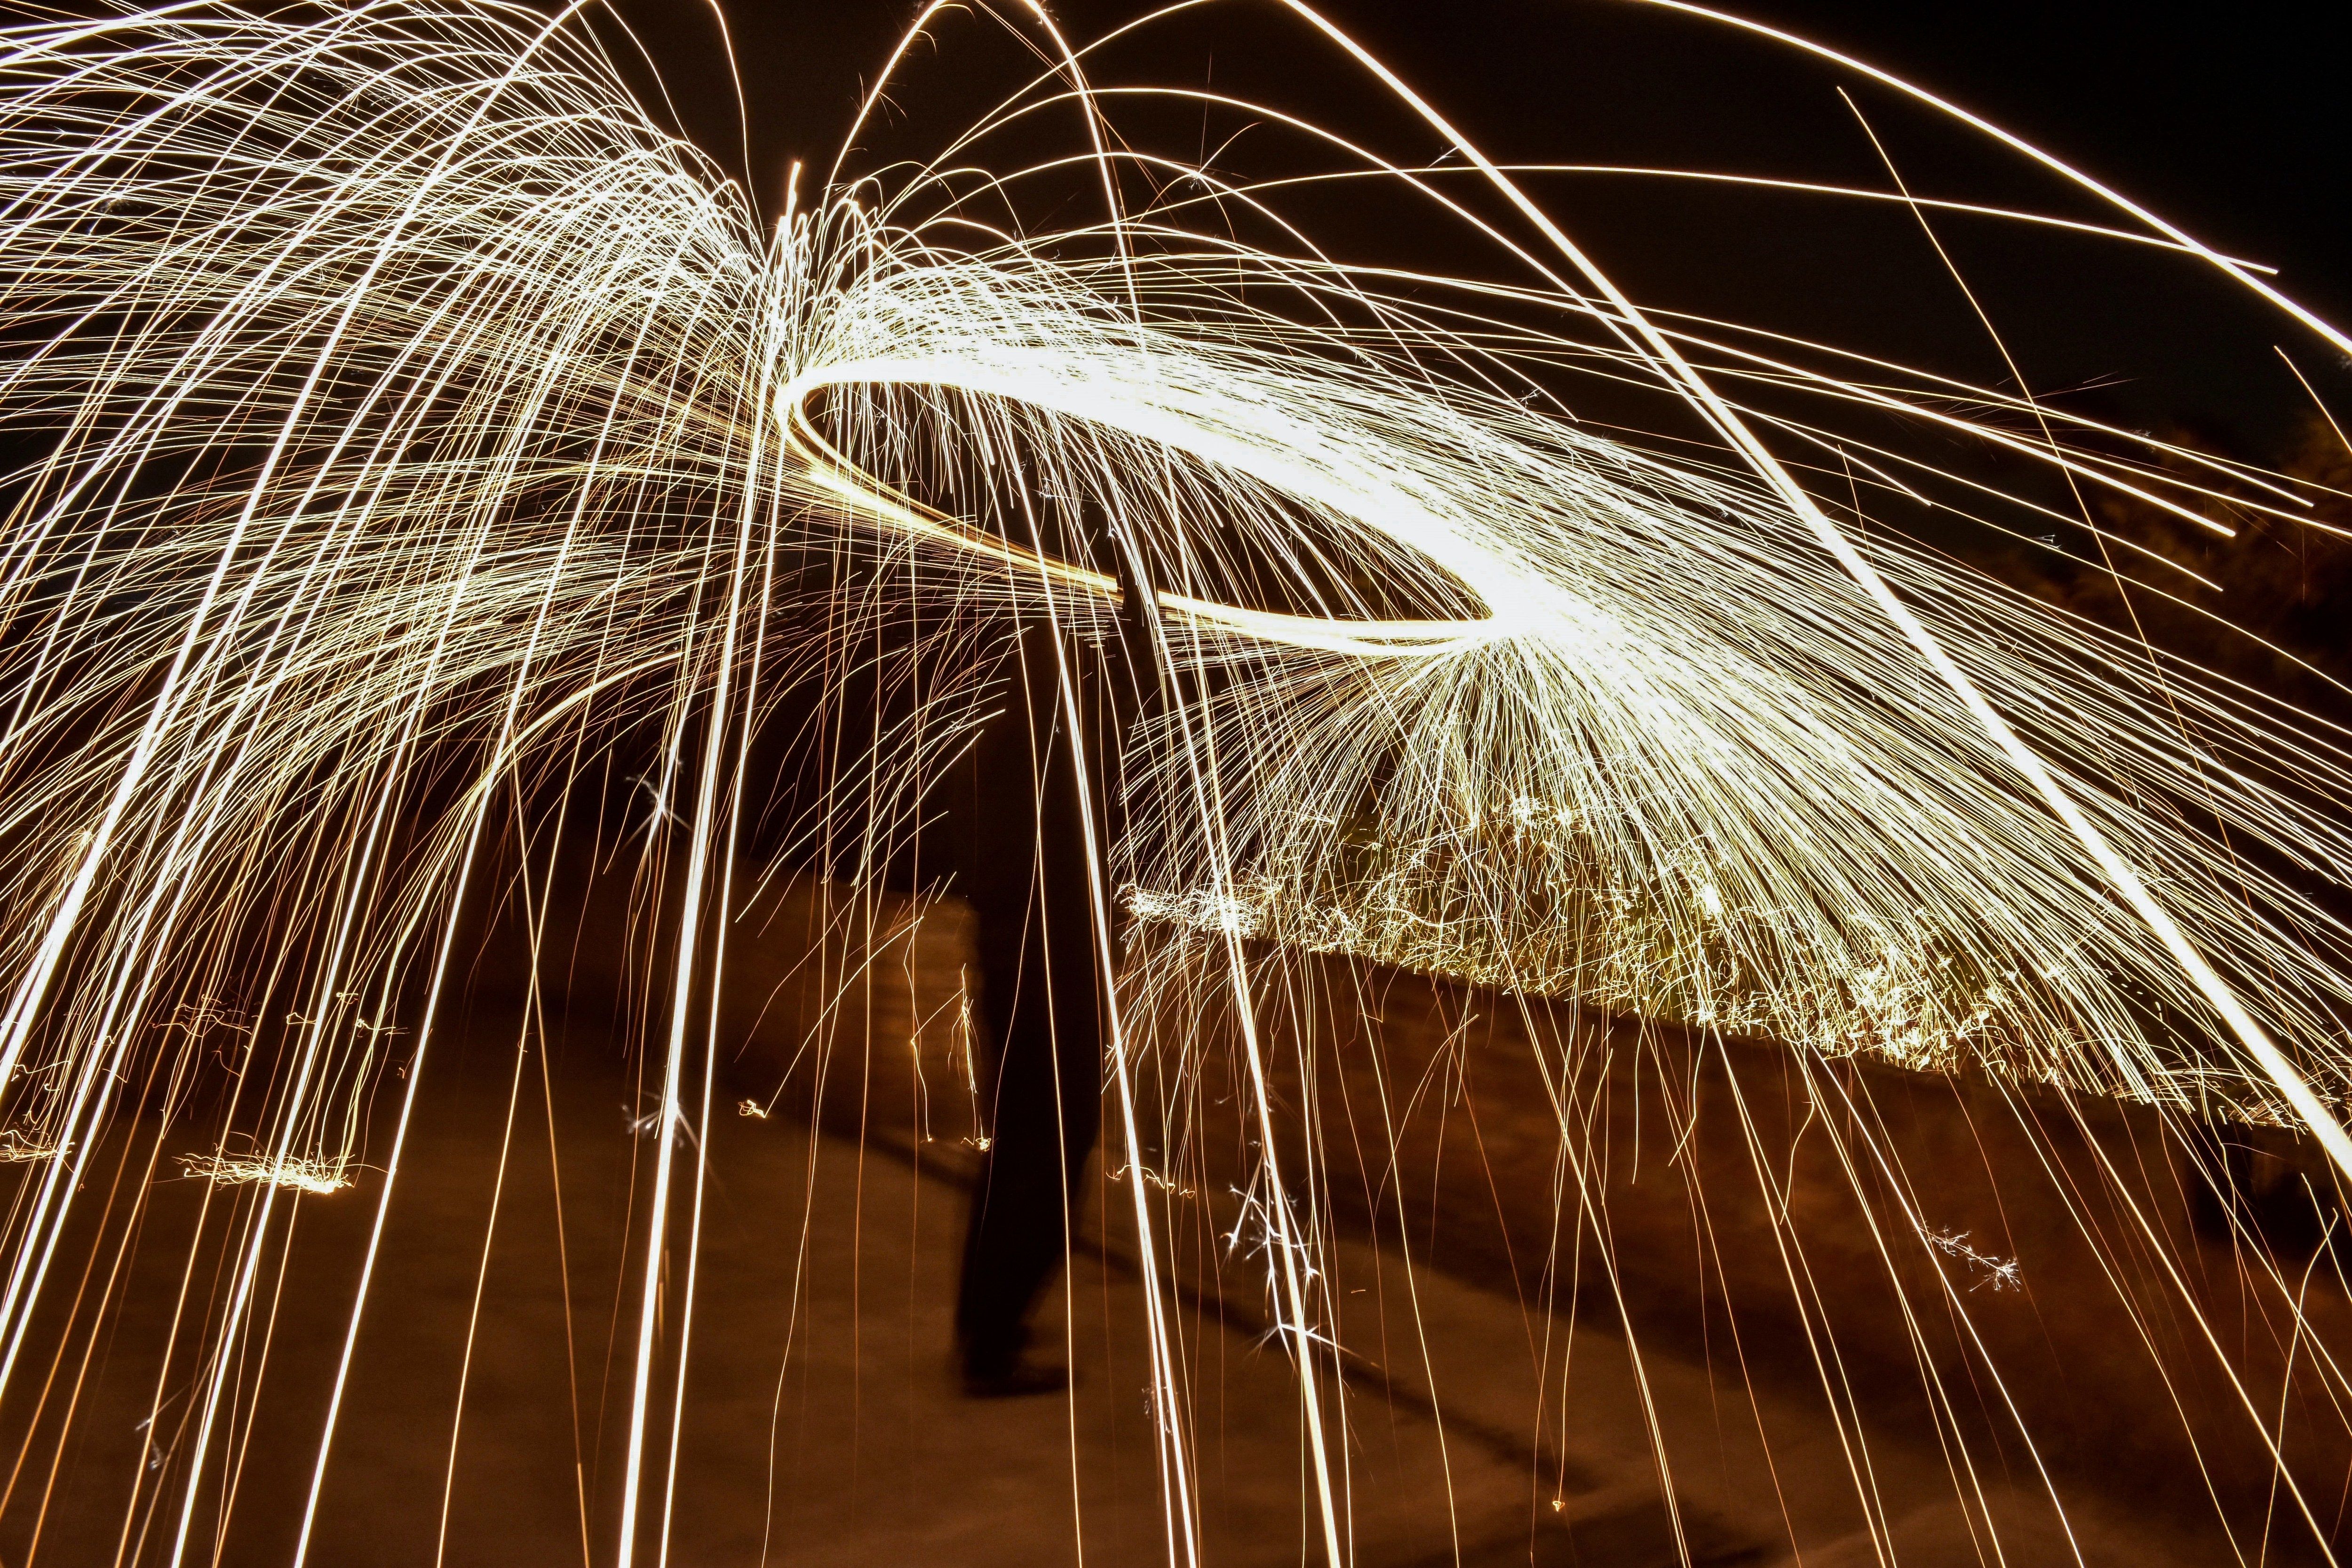  A boy spins a burning steel wool with a sling performing light painting during the New Year celebrations in Rajpura town